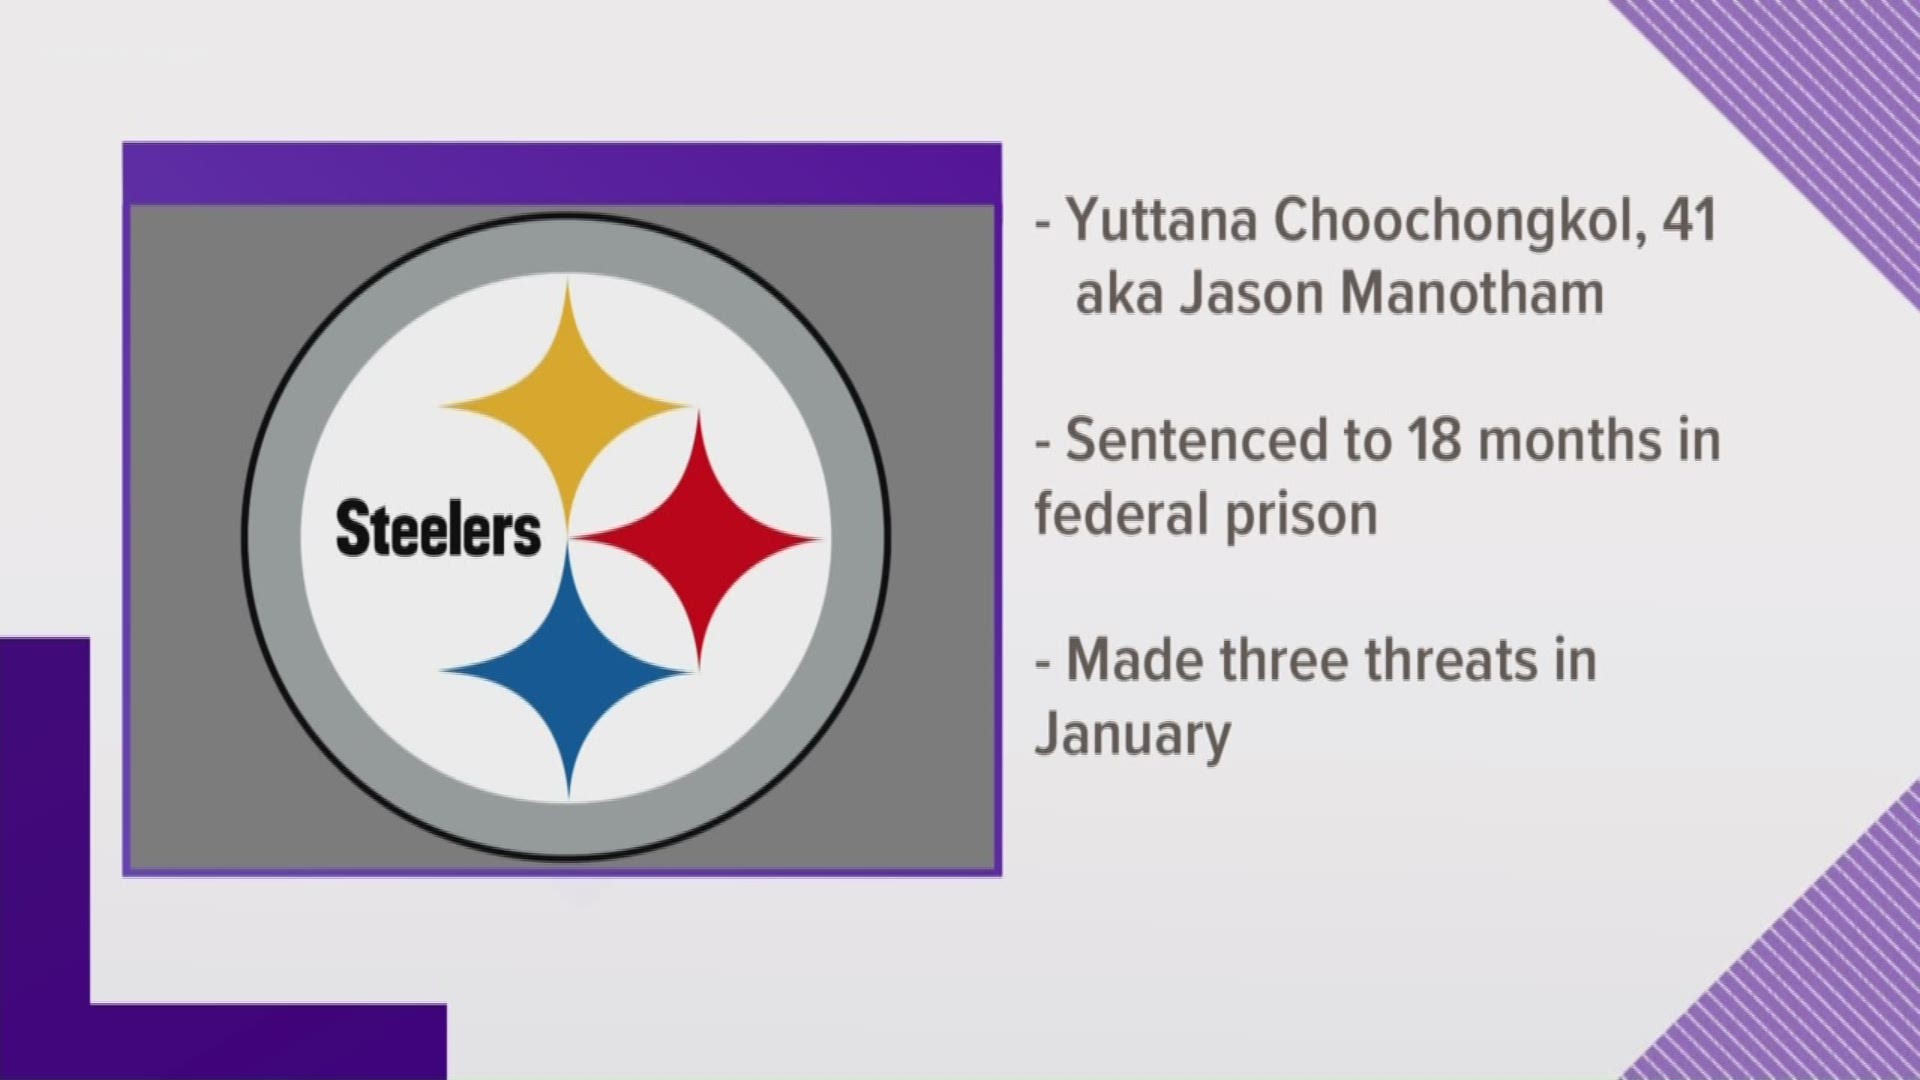 A judge on Tuesday sentenced a 41-year-old San Antonio man to jail for threatening to shoot up a Pittsburgh Steelers playoff game last January.